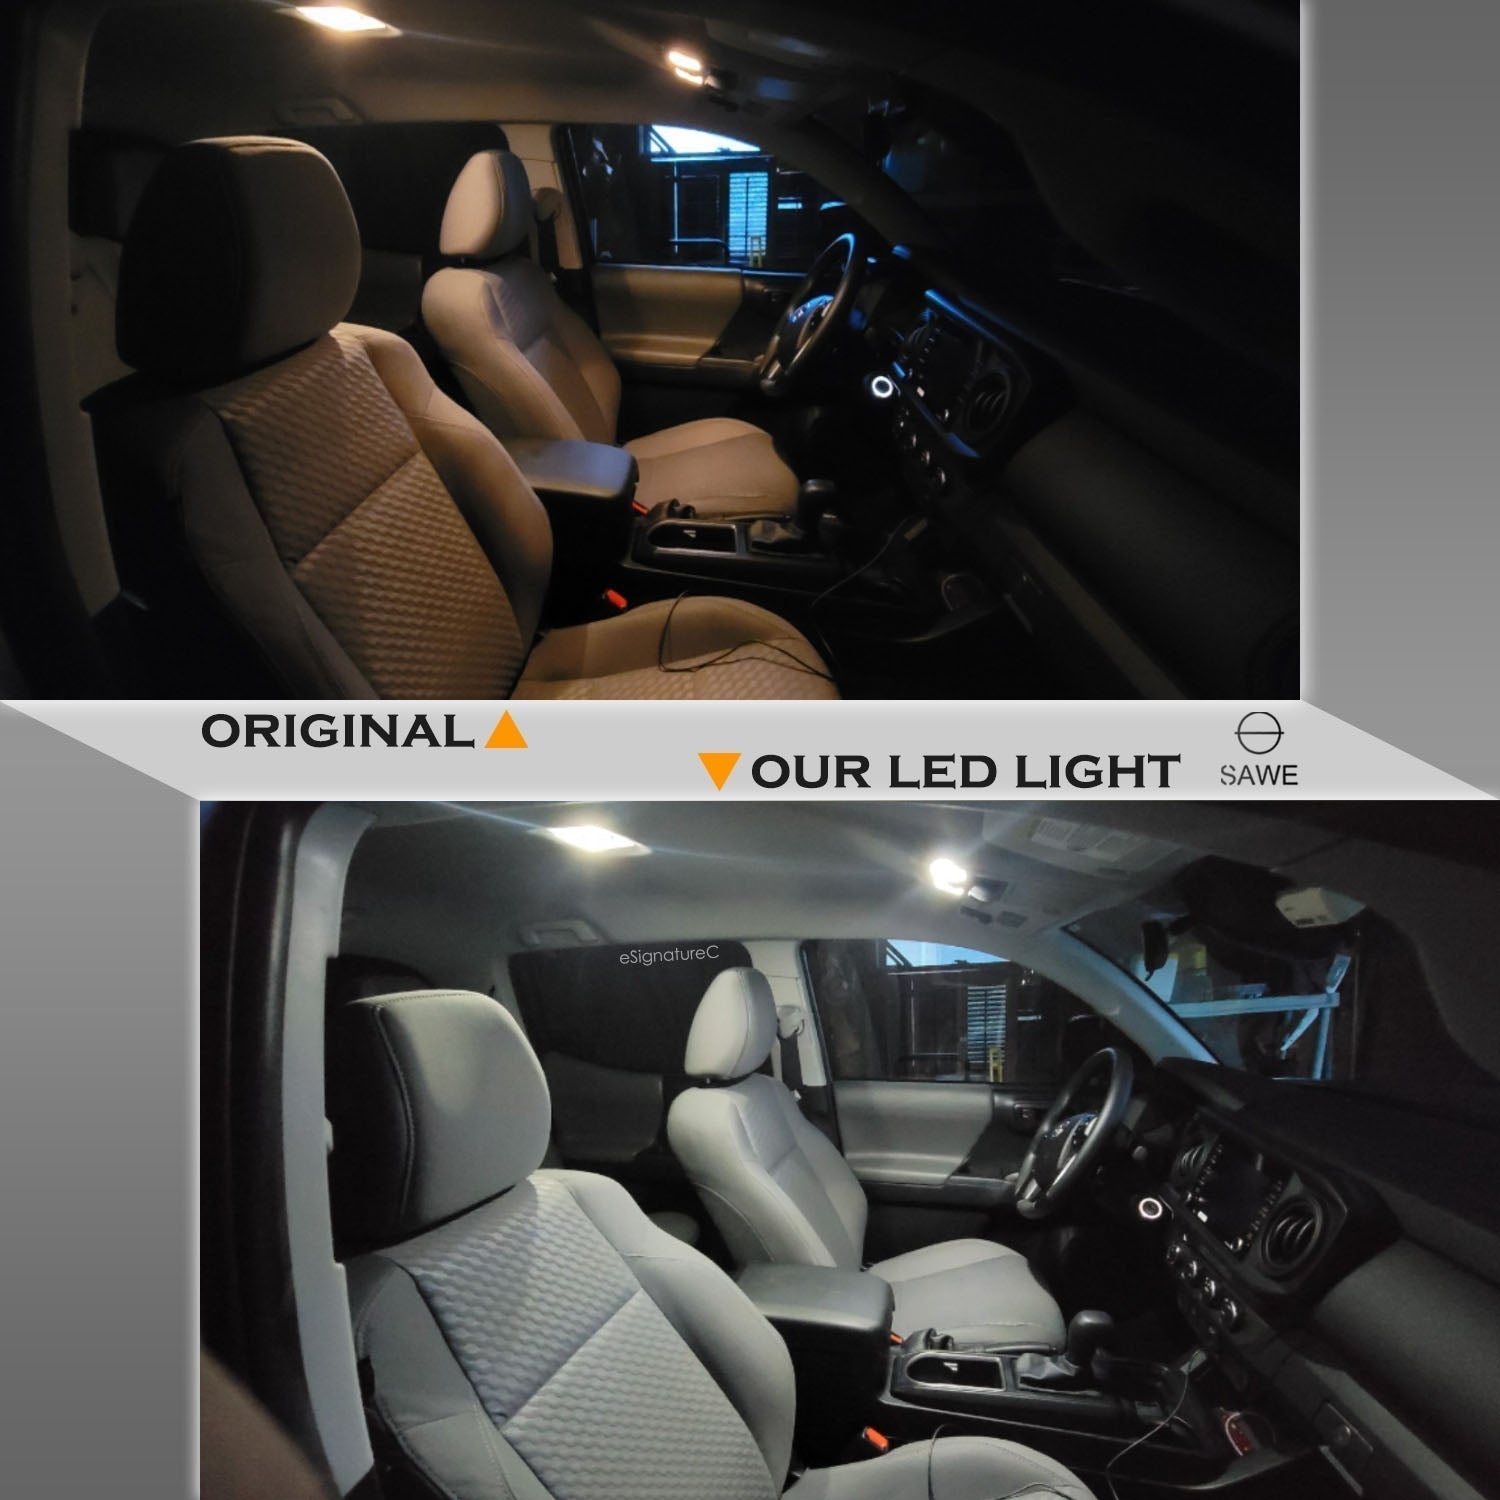 For Chevrolet Tahoe Interior LED Lights - Dome & Map Lights Package Kit for 2007 - 2014 - White